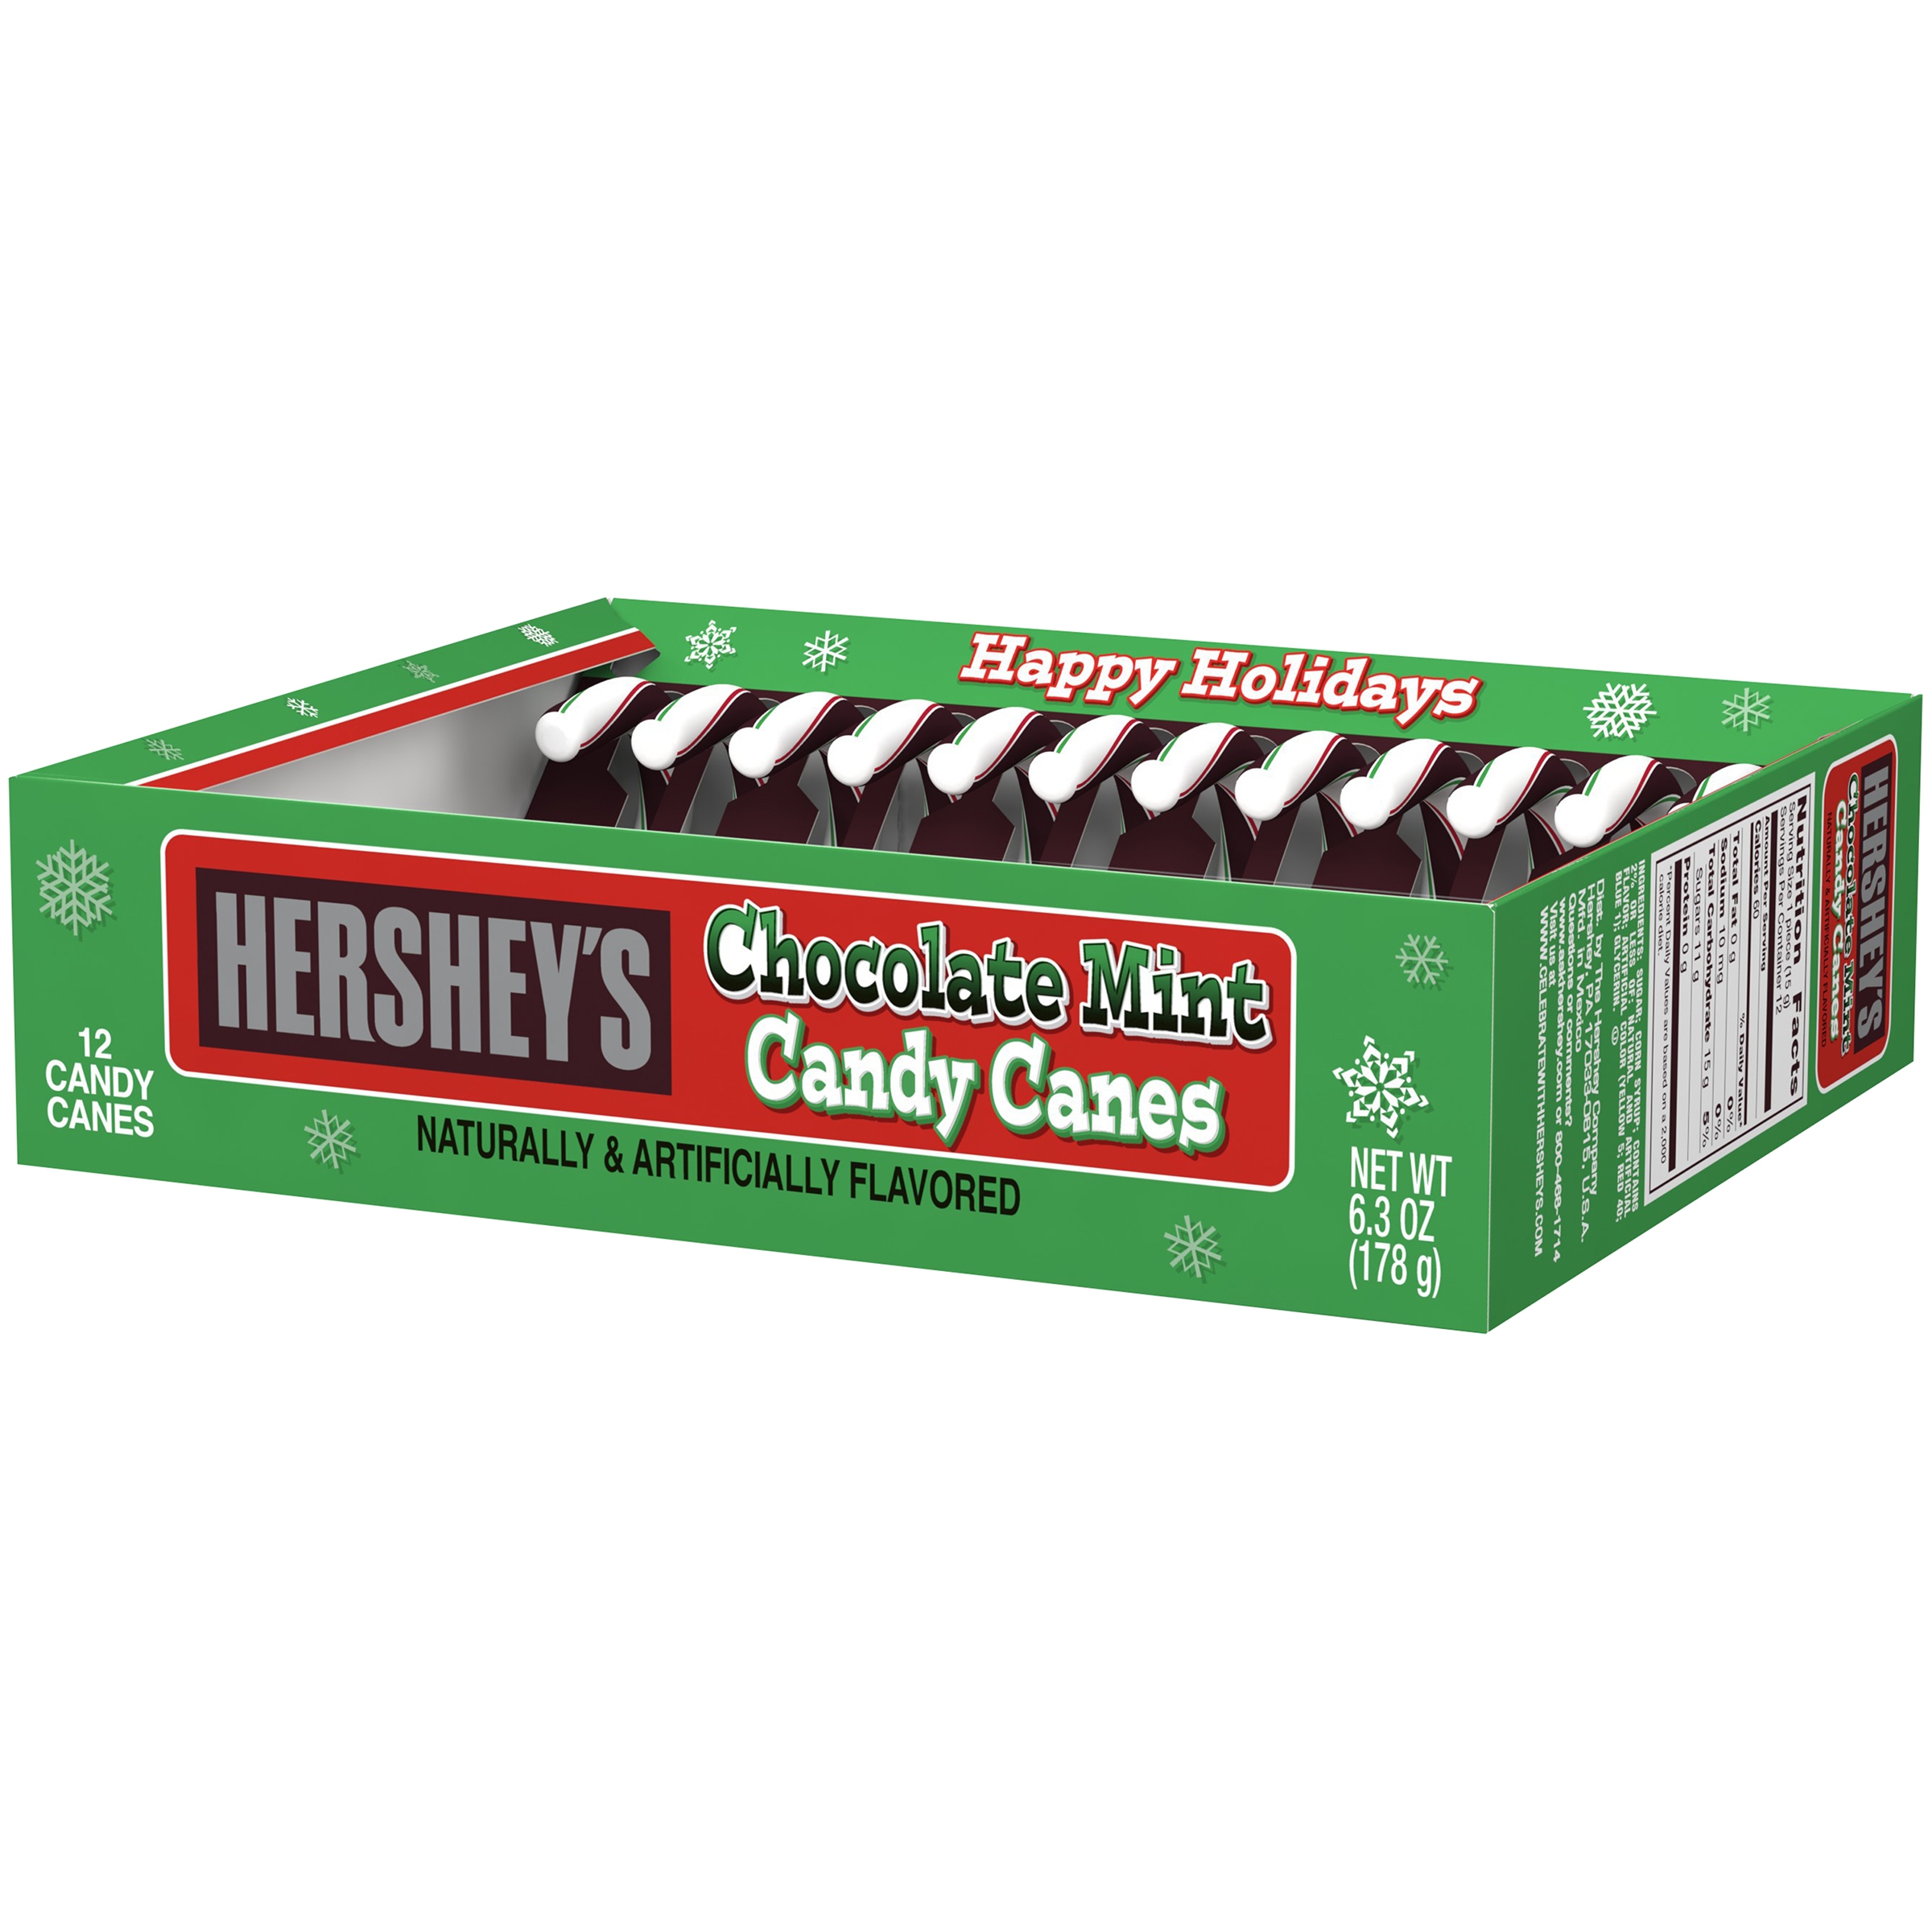 Hershey's Chocolate Mint Candy Canes, 6.3 Oz., 12 Count - image 2 of 4